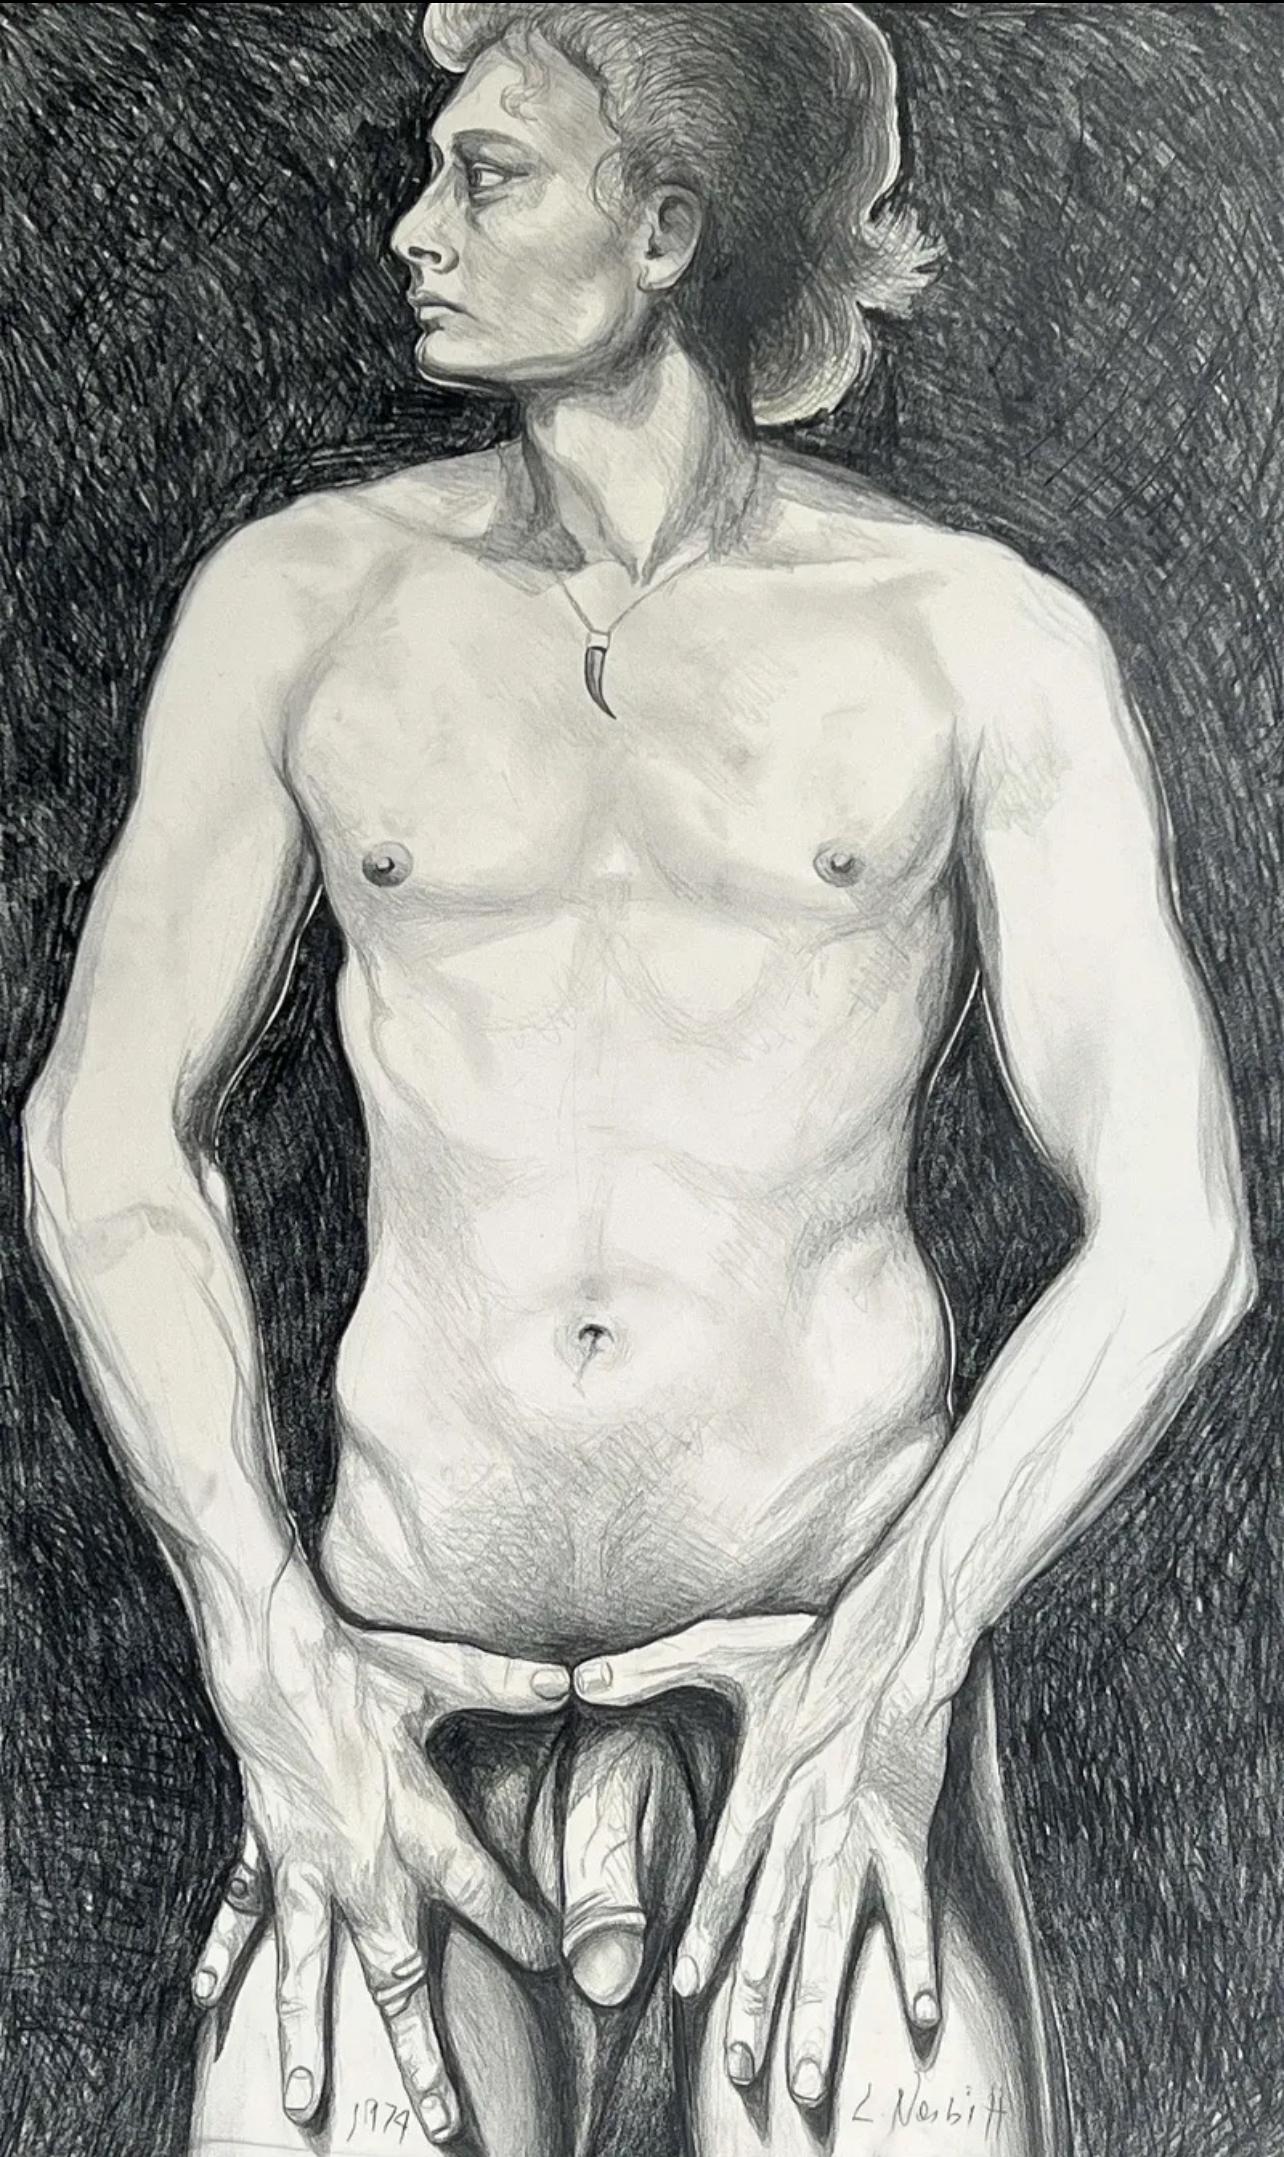 Artist: Lowell Nesbitt (1933-1993)
Title: (Male Nude) Untitled, 1974
Year: 1974
Medium: Graphite on Artist's Board
Size: 38 x 23.5 inches
Condition: Excellent
Inscription: Signed & dated in pencil

LOWELL NESBITT (1933-1993) One of the most